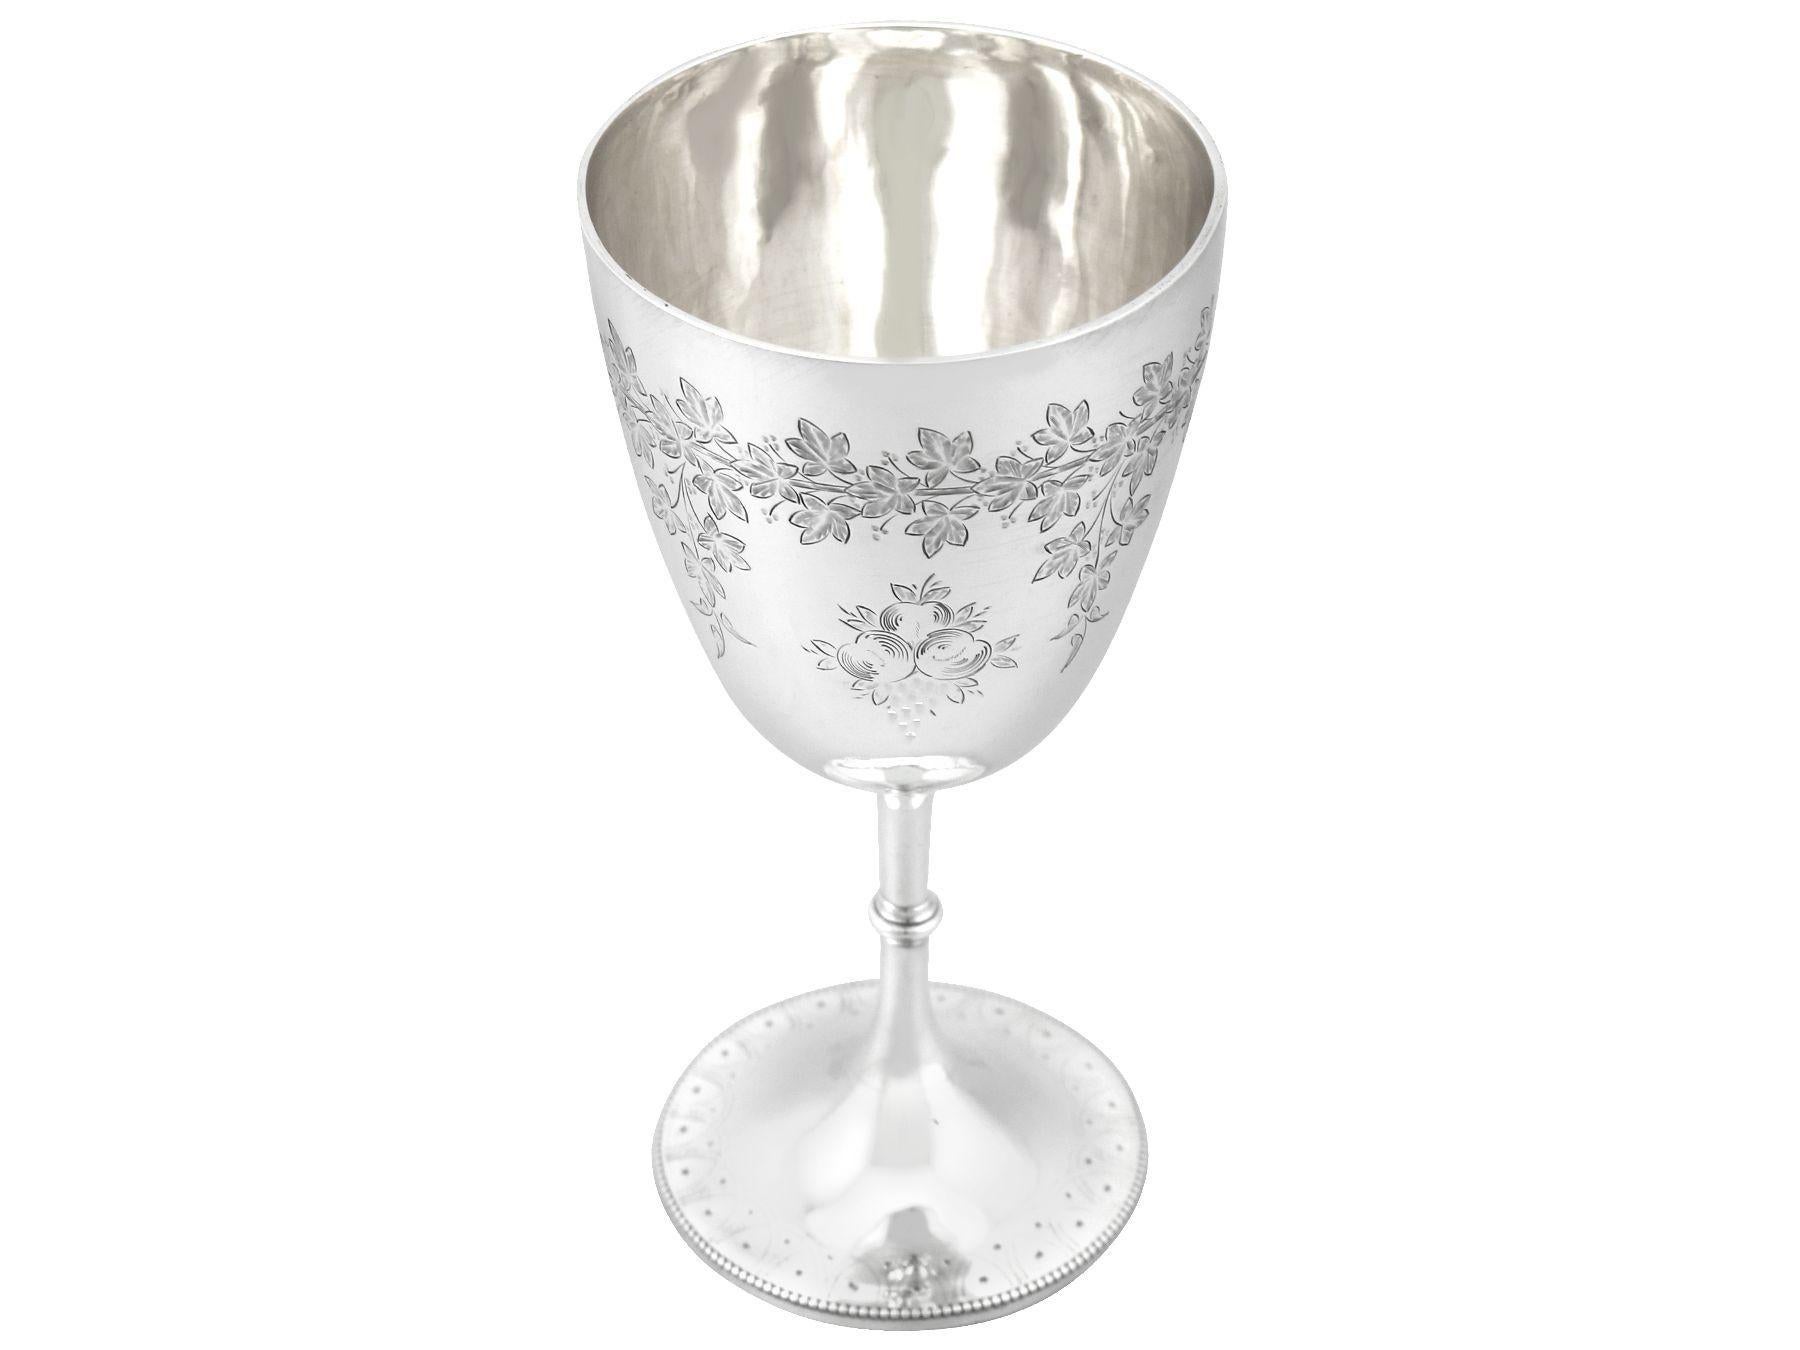 Antique Victorian 1876 Sterling Silver Goblet In Excellent Condition For Sale In Jesmond, Newcastle Upon Tyne